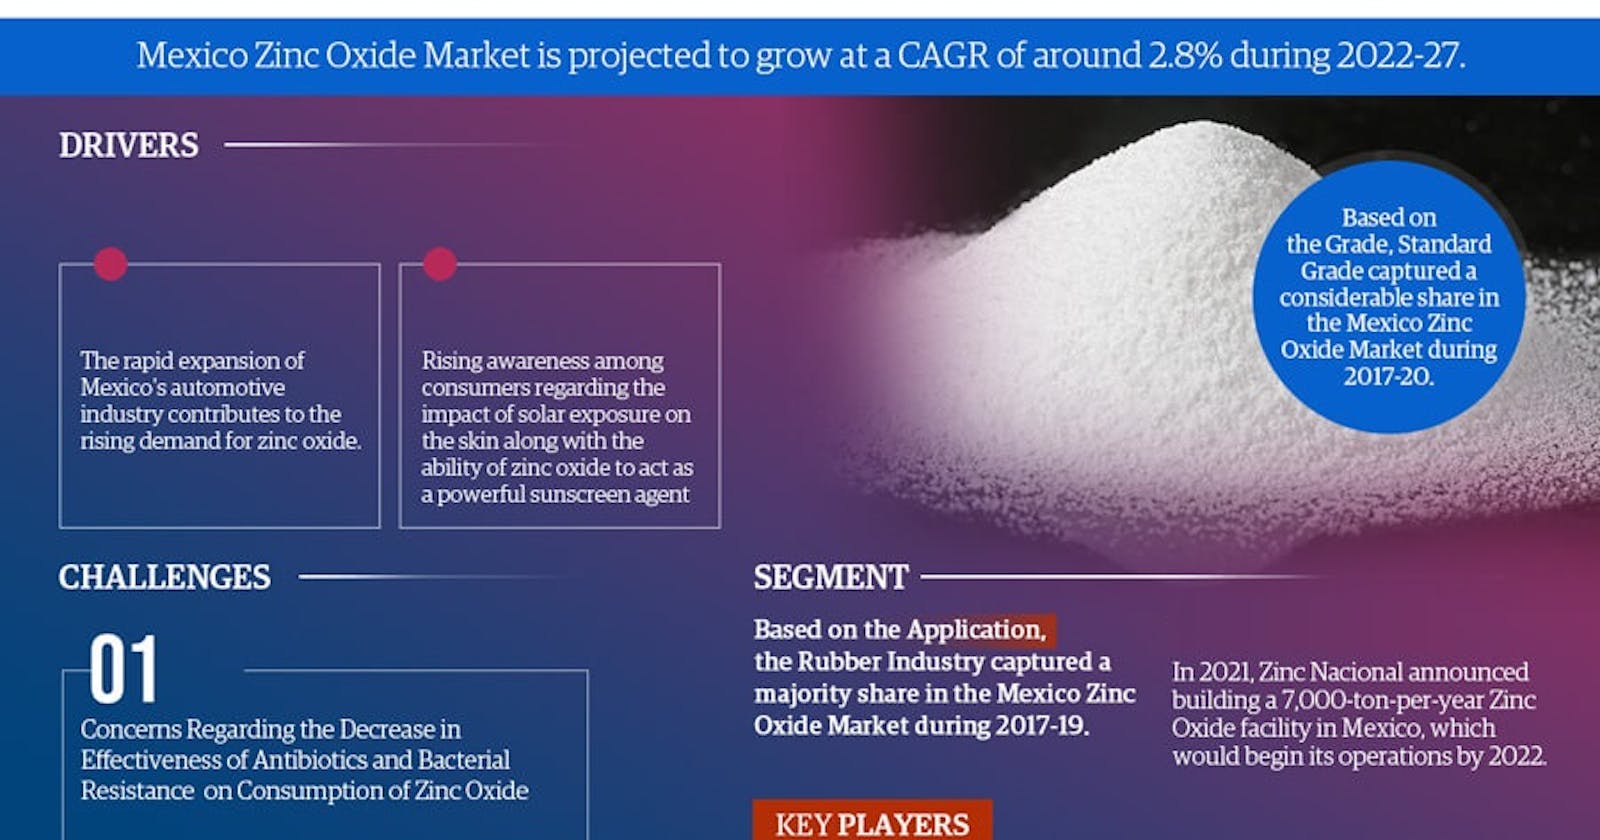 Mexico Zinc Oxide Market Trends: Analysis of 2.8% CAGR Growth (2022-27)